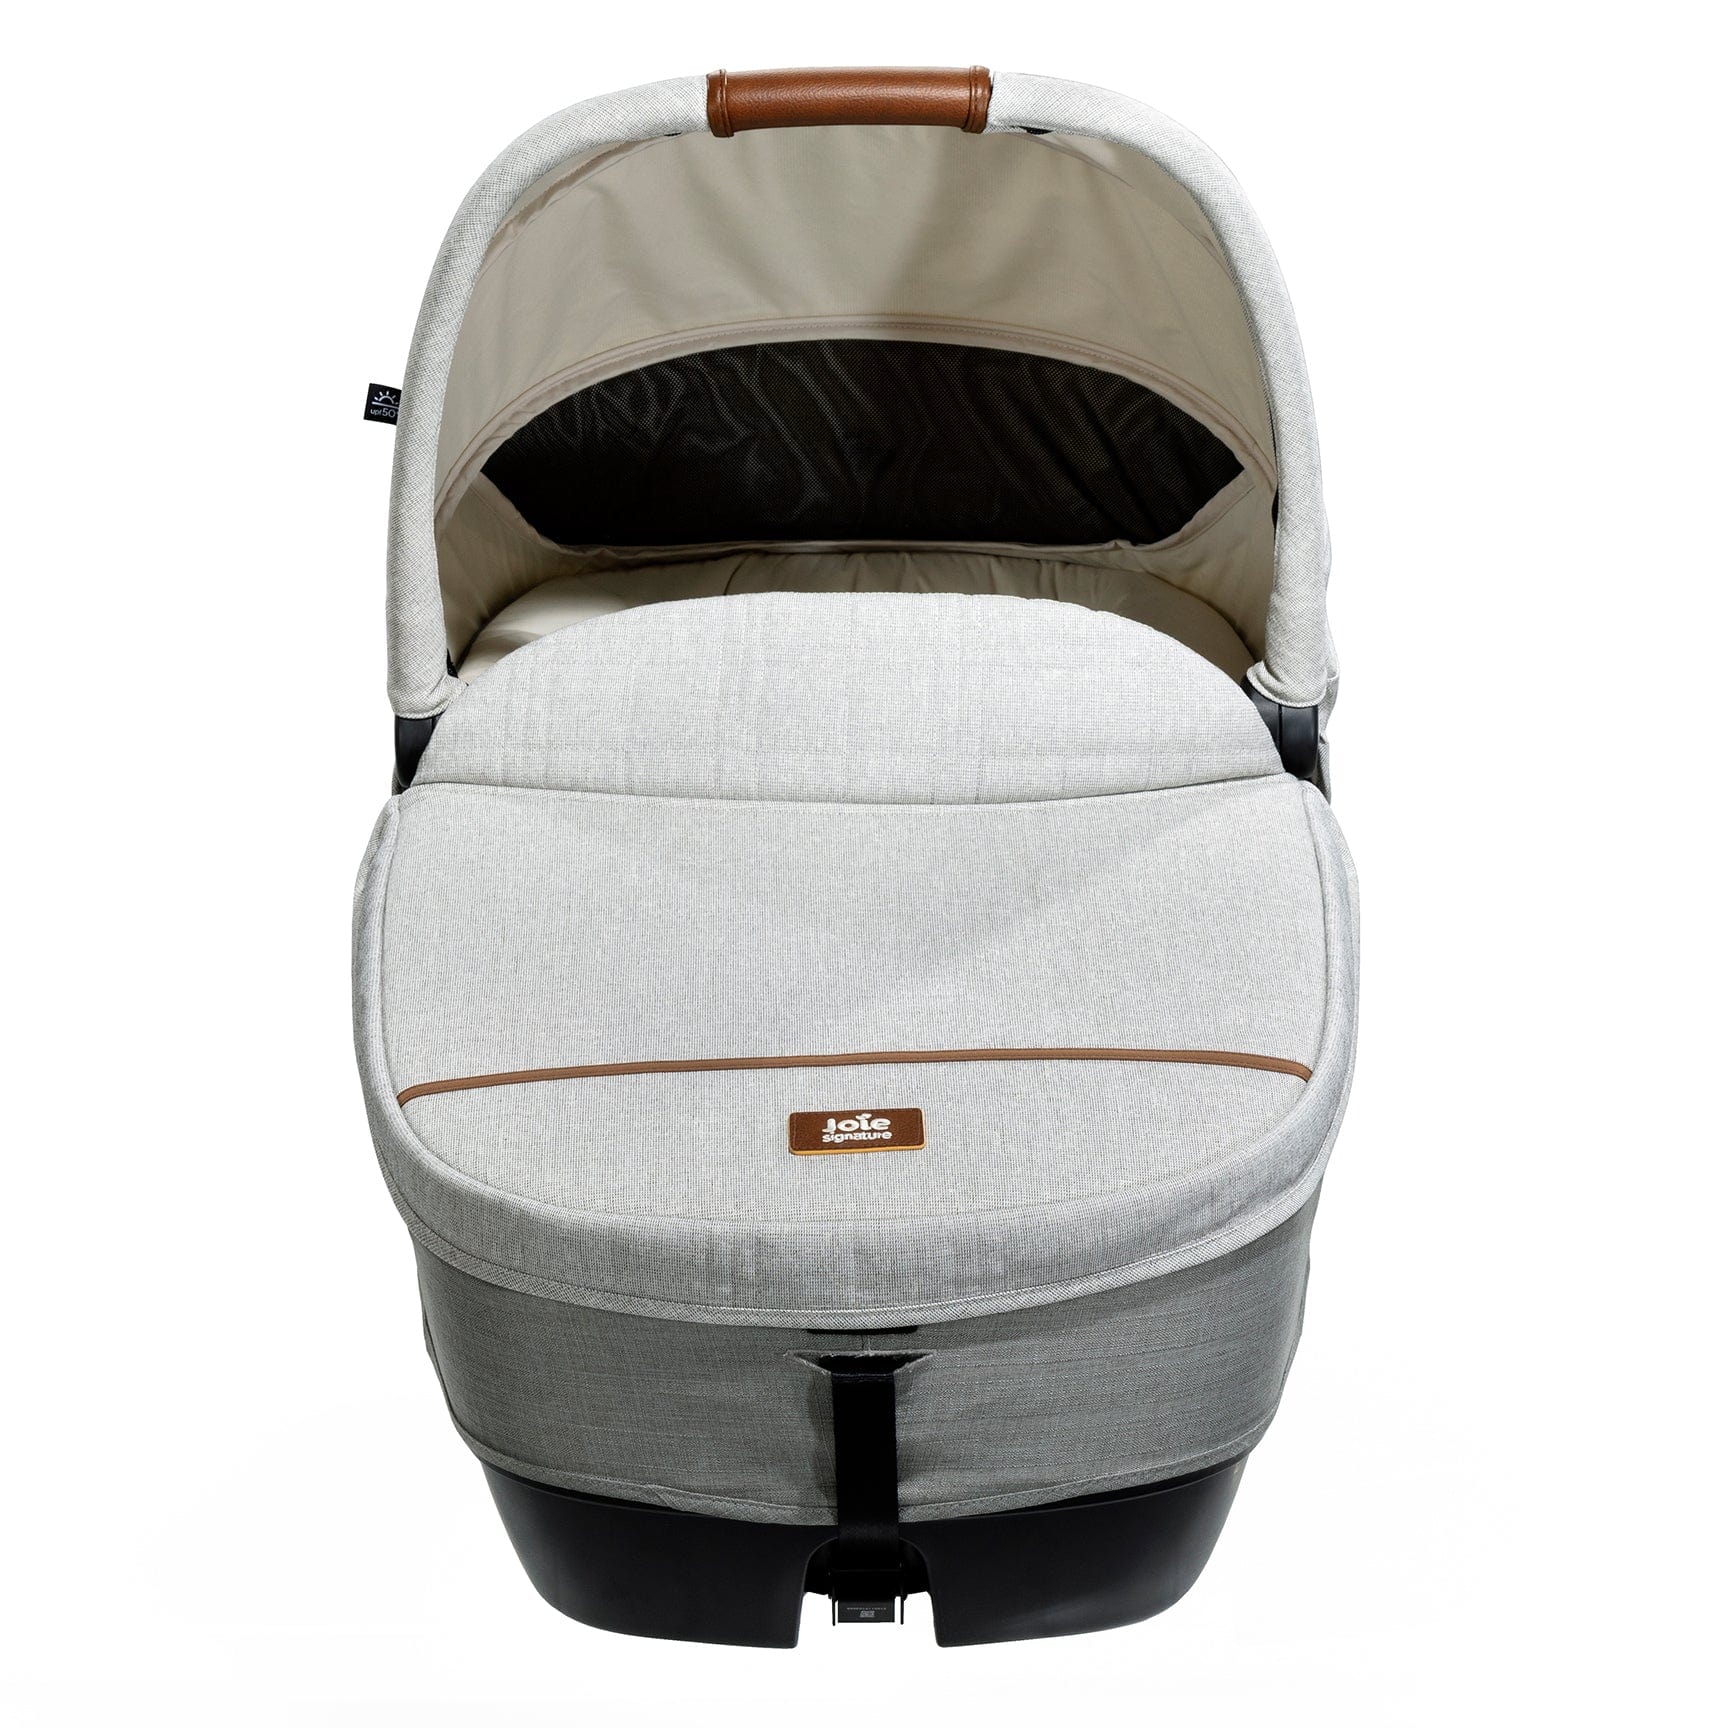 Calmi Car Cot Bed & I-Base Encore in Oyster 0-76 cm (Infant carriers) 12219-OYS 5056080612423